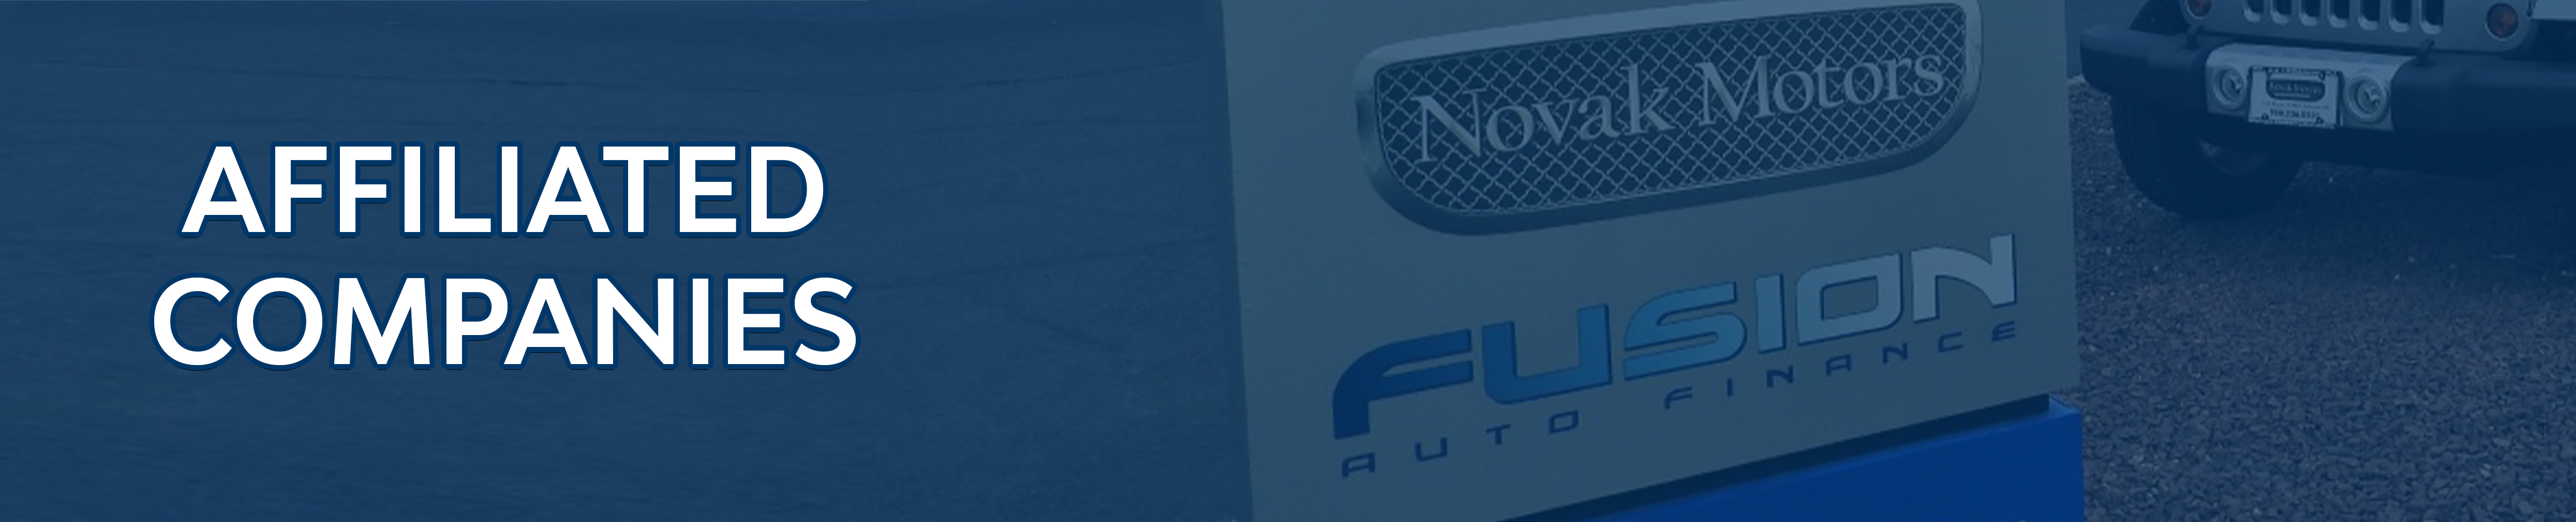 Affiliated Companies – Fusion Auto Finance: The Leader in Credit Union